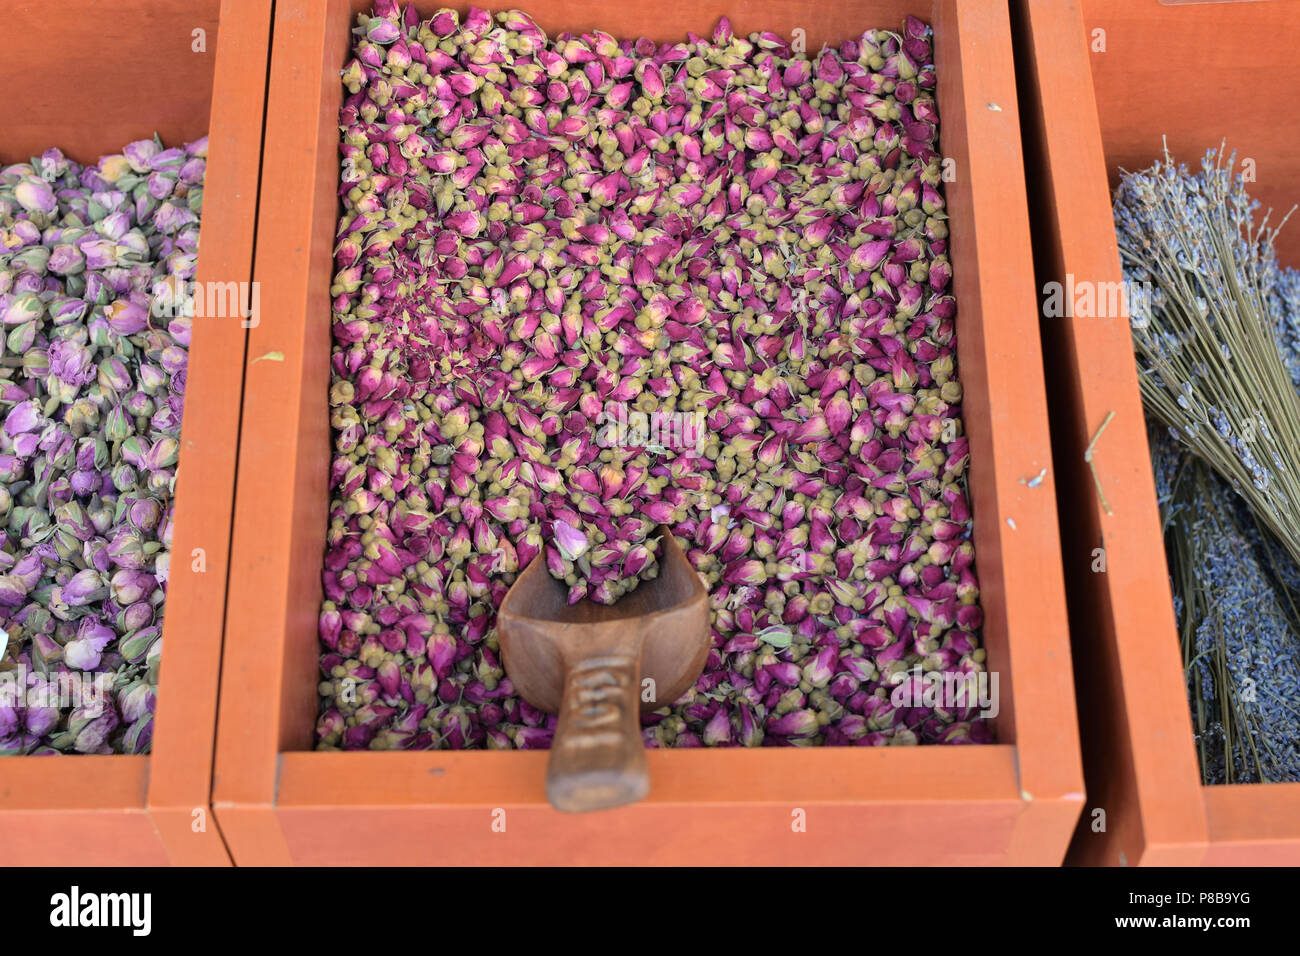 Dried red roses aromatic rosebuds and other spices for sale in wooden crates. Stock Photo